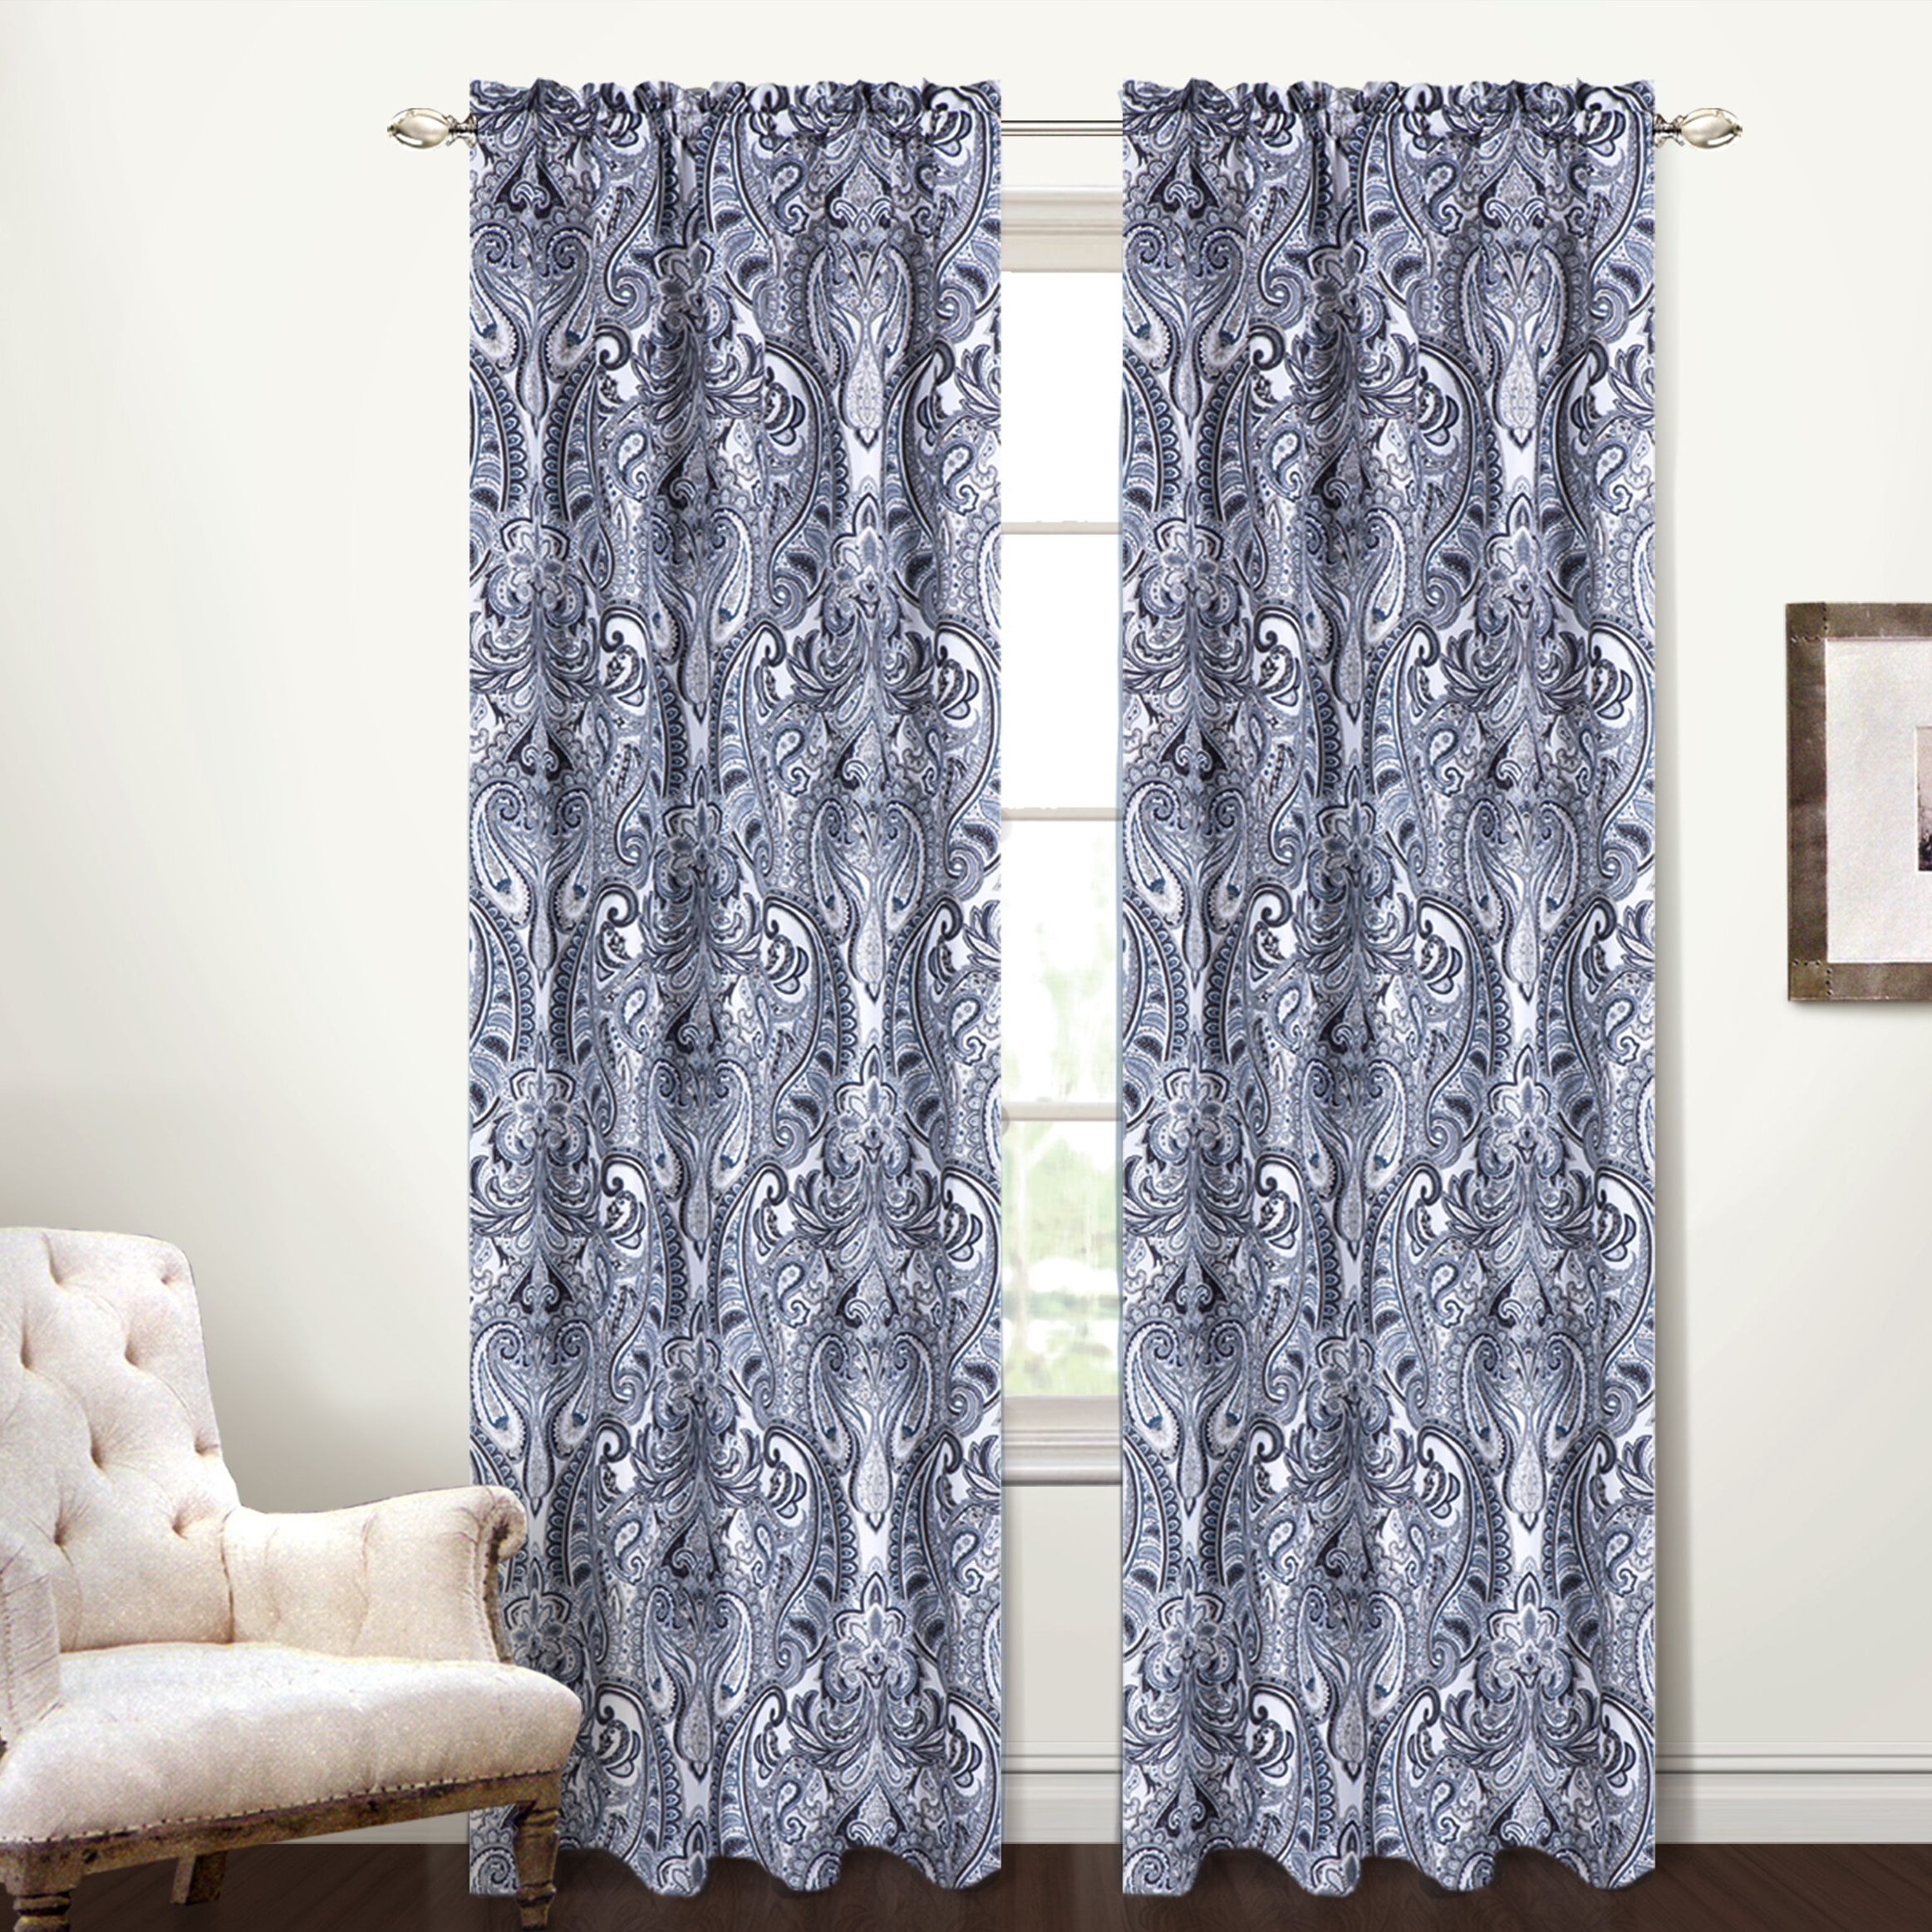 Most Popular Marine Life Motif Knitted Lace Window Curtain Pieces Pertaining To Strongsville Paisley Semi Sheer Rod Pocket Single Curtain Panel (View 18 of 20)